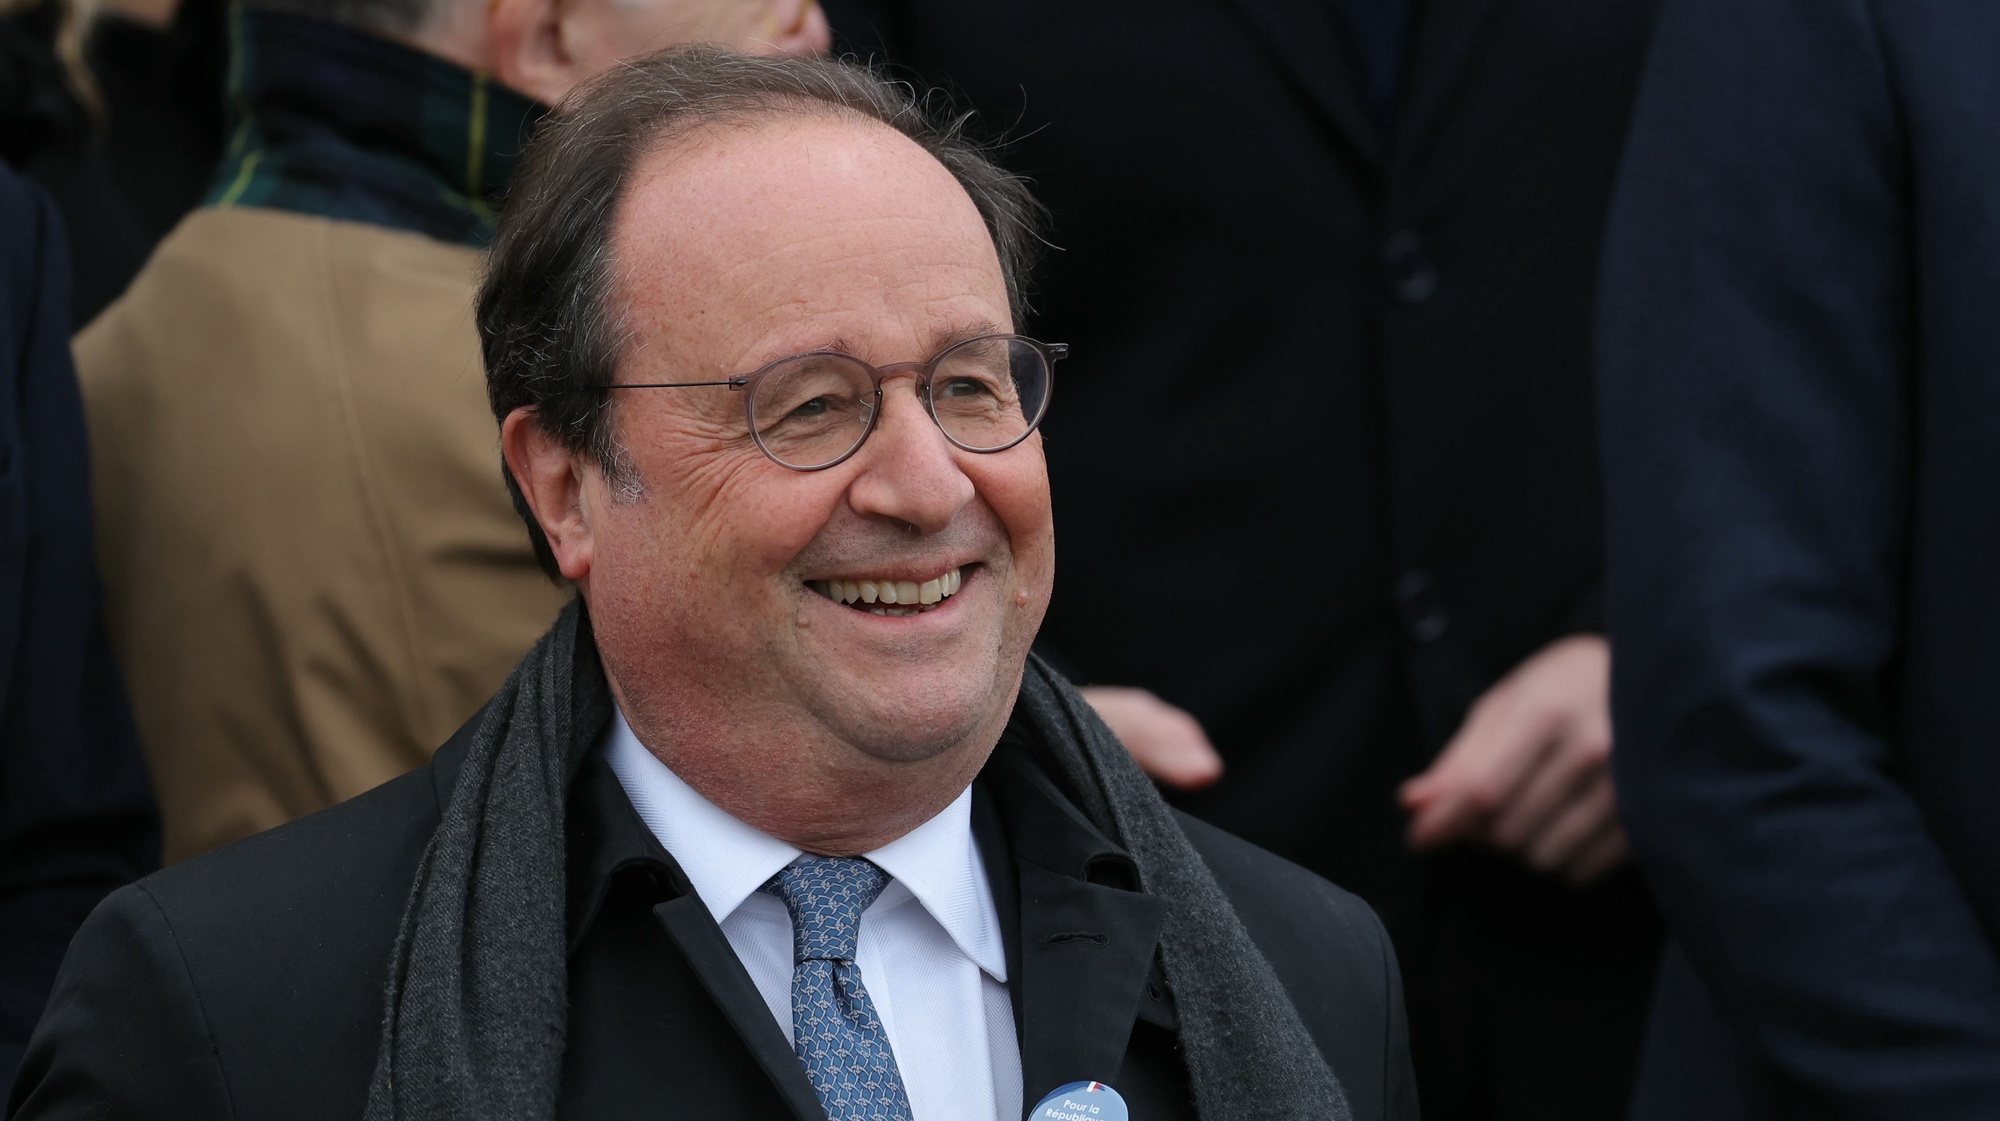 epa10971796 Former French President Francois Hollande poses for a group photograph on the front steps of the Assemblee Nationale parliament building ahead of a demonstration against anti-Semitism in Paris, France, 12 November 2023. Thousands of demonstrators are expected to march in Paris against anti-Semitism on 12 November, as tensions have risen in the French capital, which is home to large Jewish and Muslim communities, following the 07 October attack by the militant group Hamas on Israel. Thousands of Israelis and Palestinians have died since the militant group Hamas launched an unprecedented attack on Israel from the Gaza Strip on 07 October, and the Israeli strikes on the Palestinian enclave which followed it.  EPA/THOMAS SAMSON / POOL  MAXPPP OUT